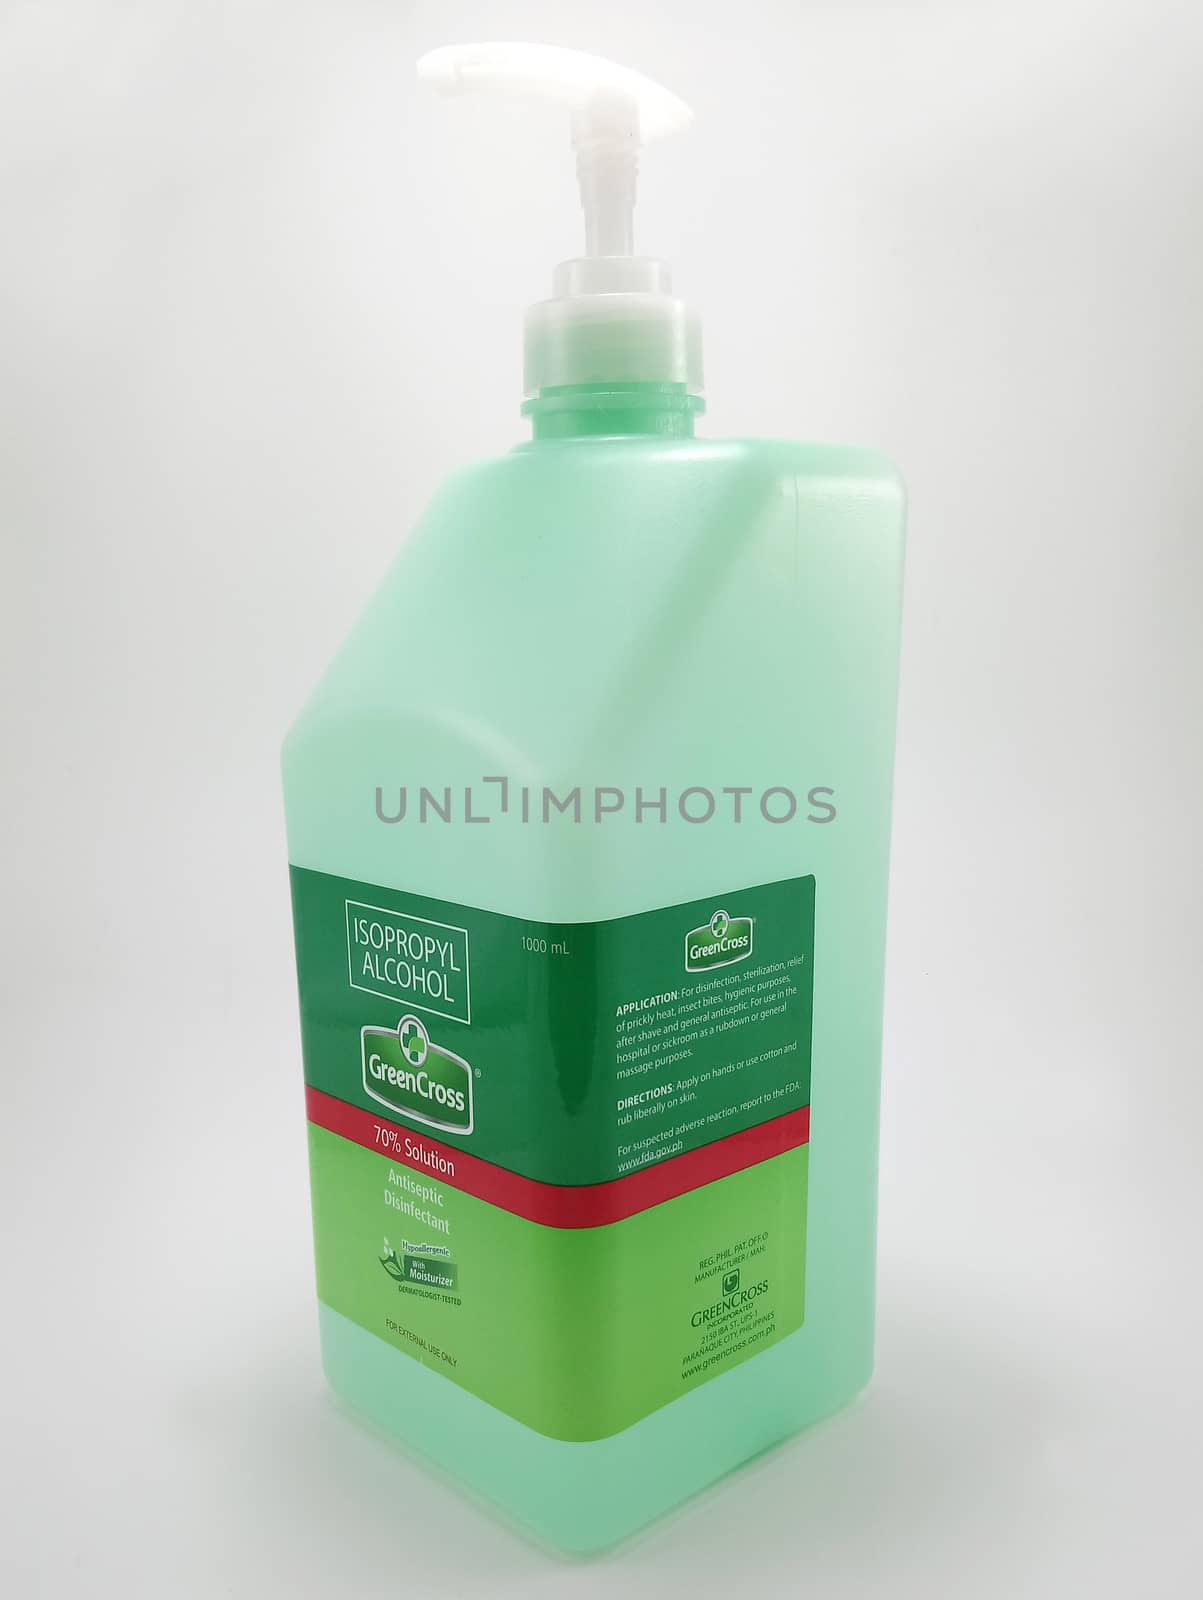 Green cross isoprophyl alcohol squeeze bottle in Manila, Philipp by imwaltersy